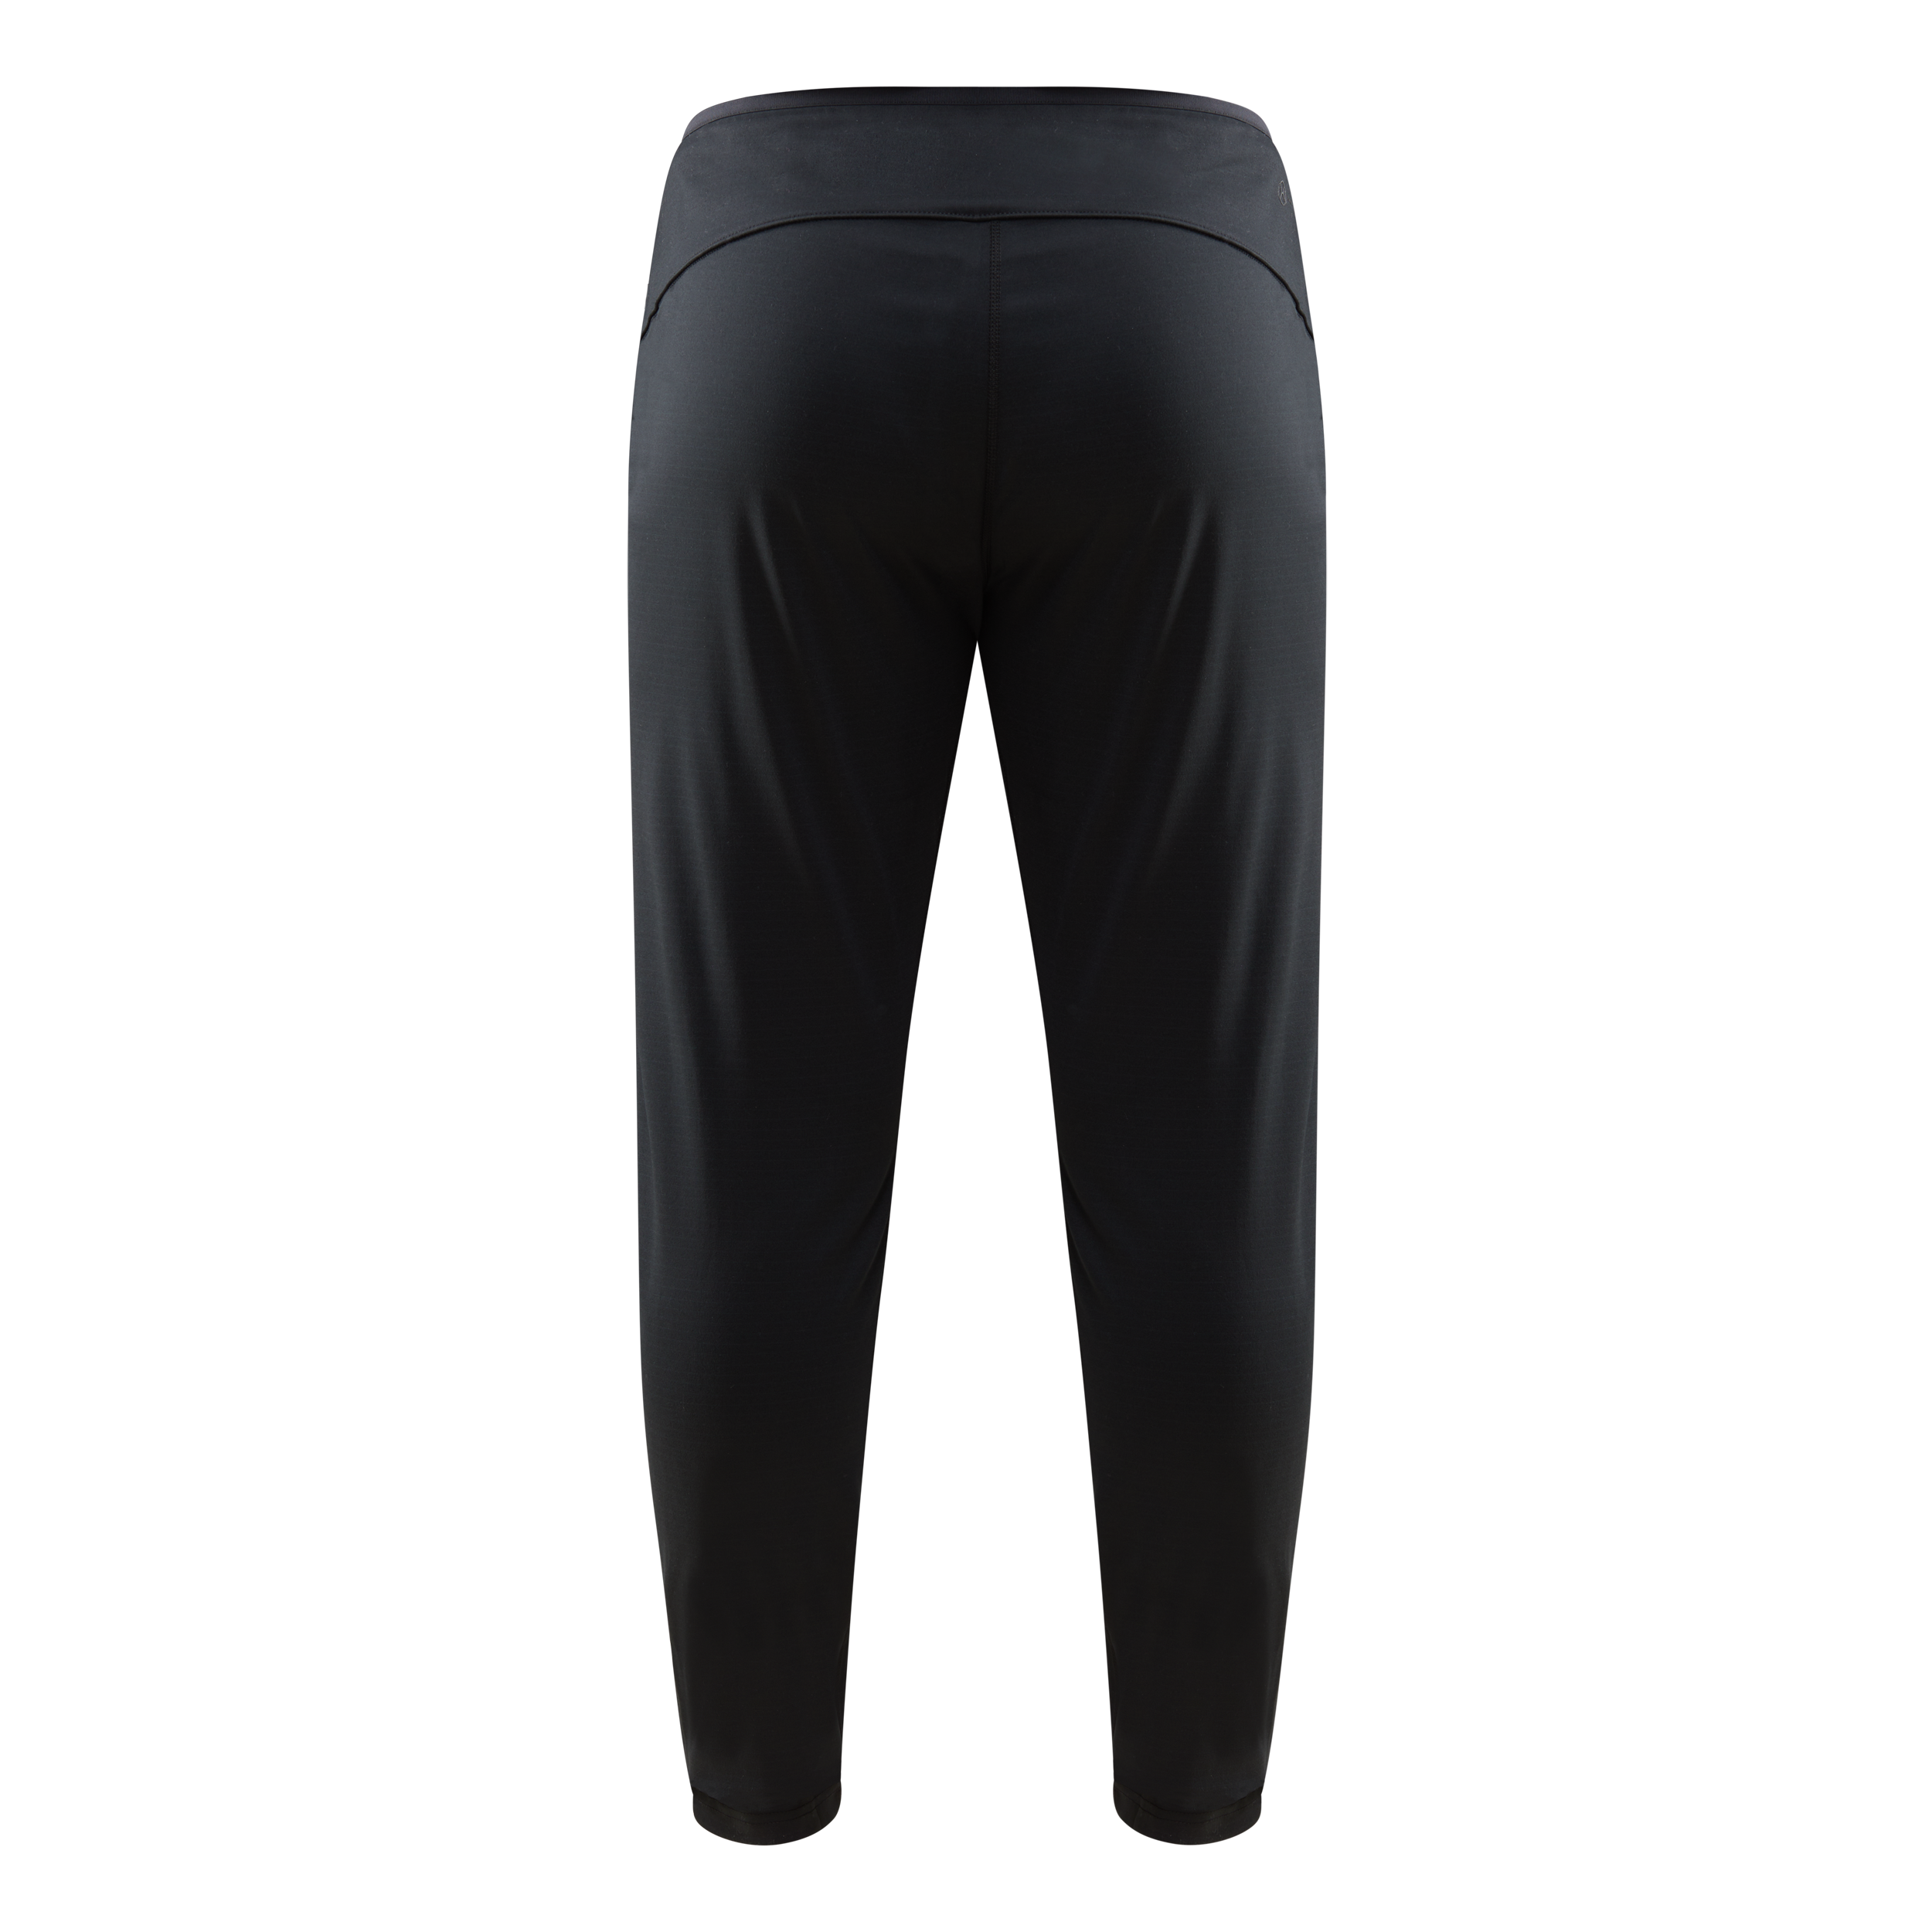 Athletic Works Women's Athleisure Soft Jogger Pants